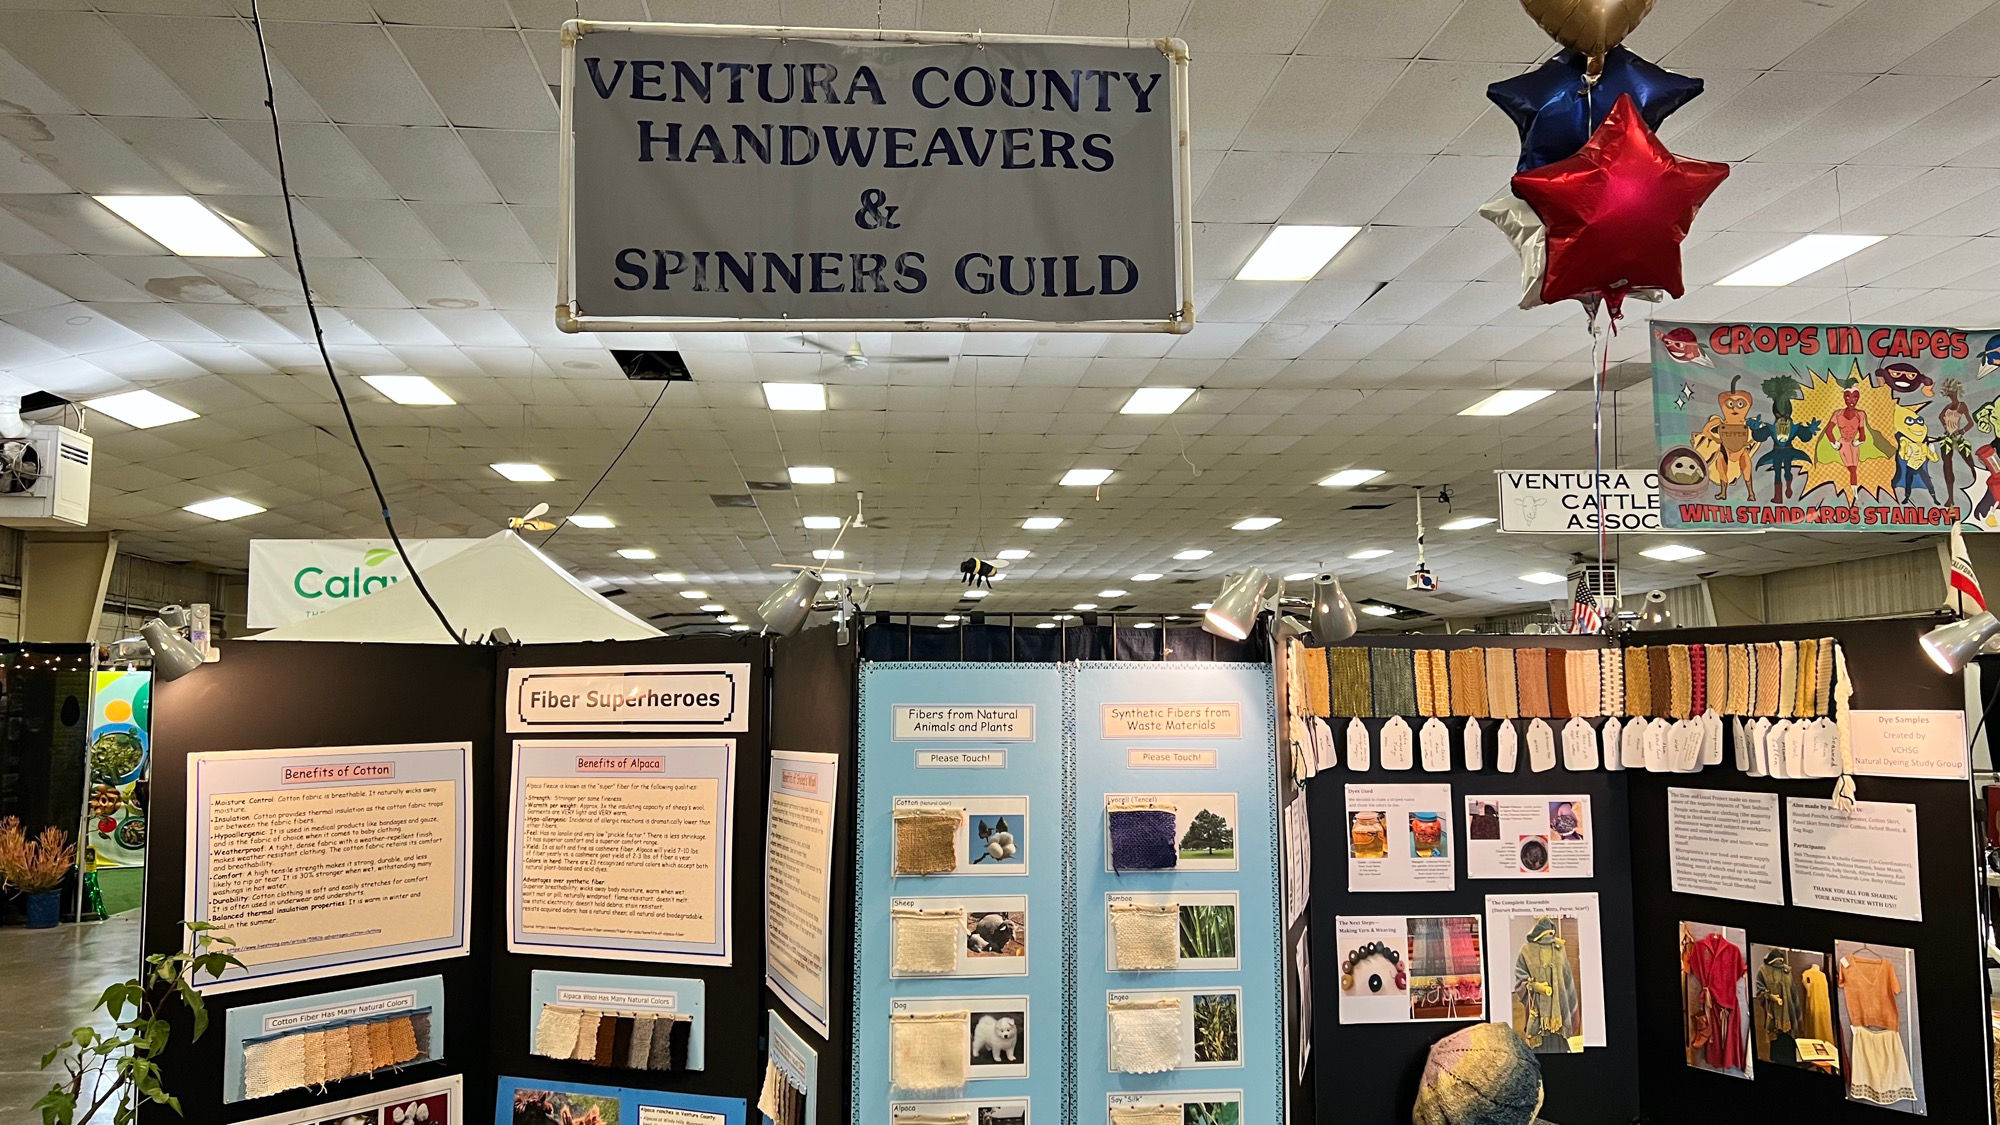 VC Handweavers and Spinners Guild Booth